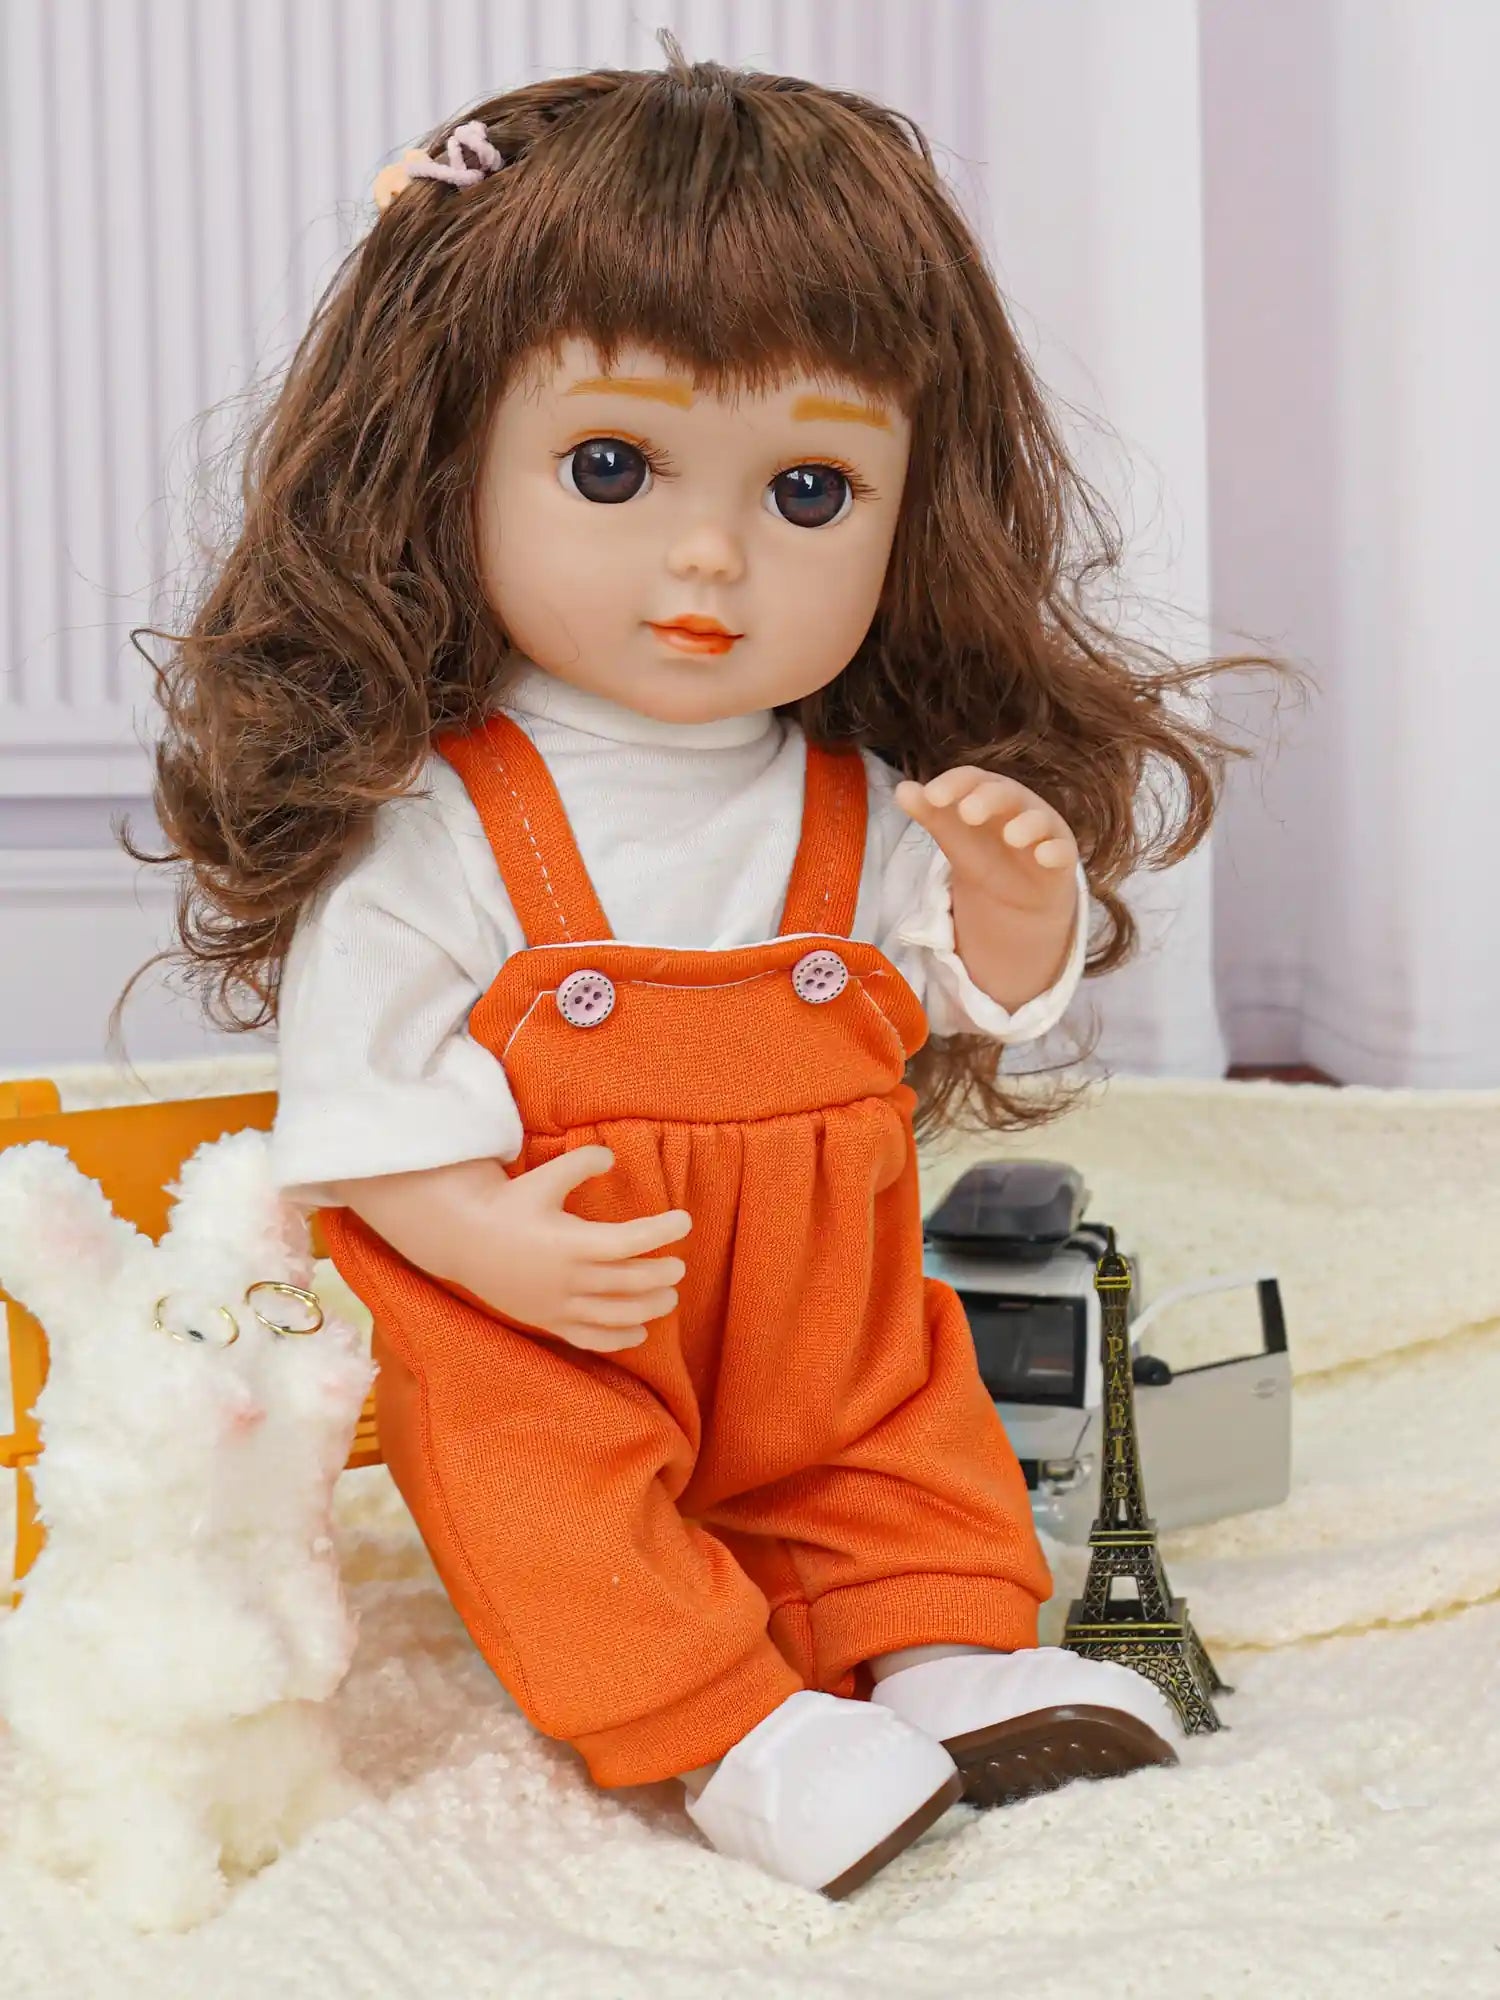 Doll with hair clip, orange dungarees, white dog toy, and Eiffel Tower model.